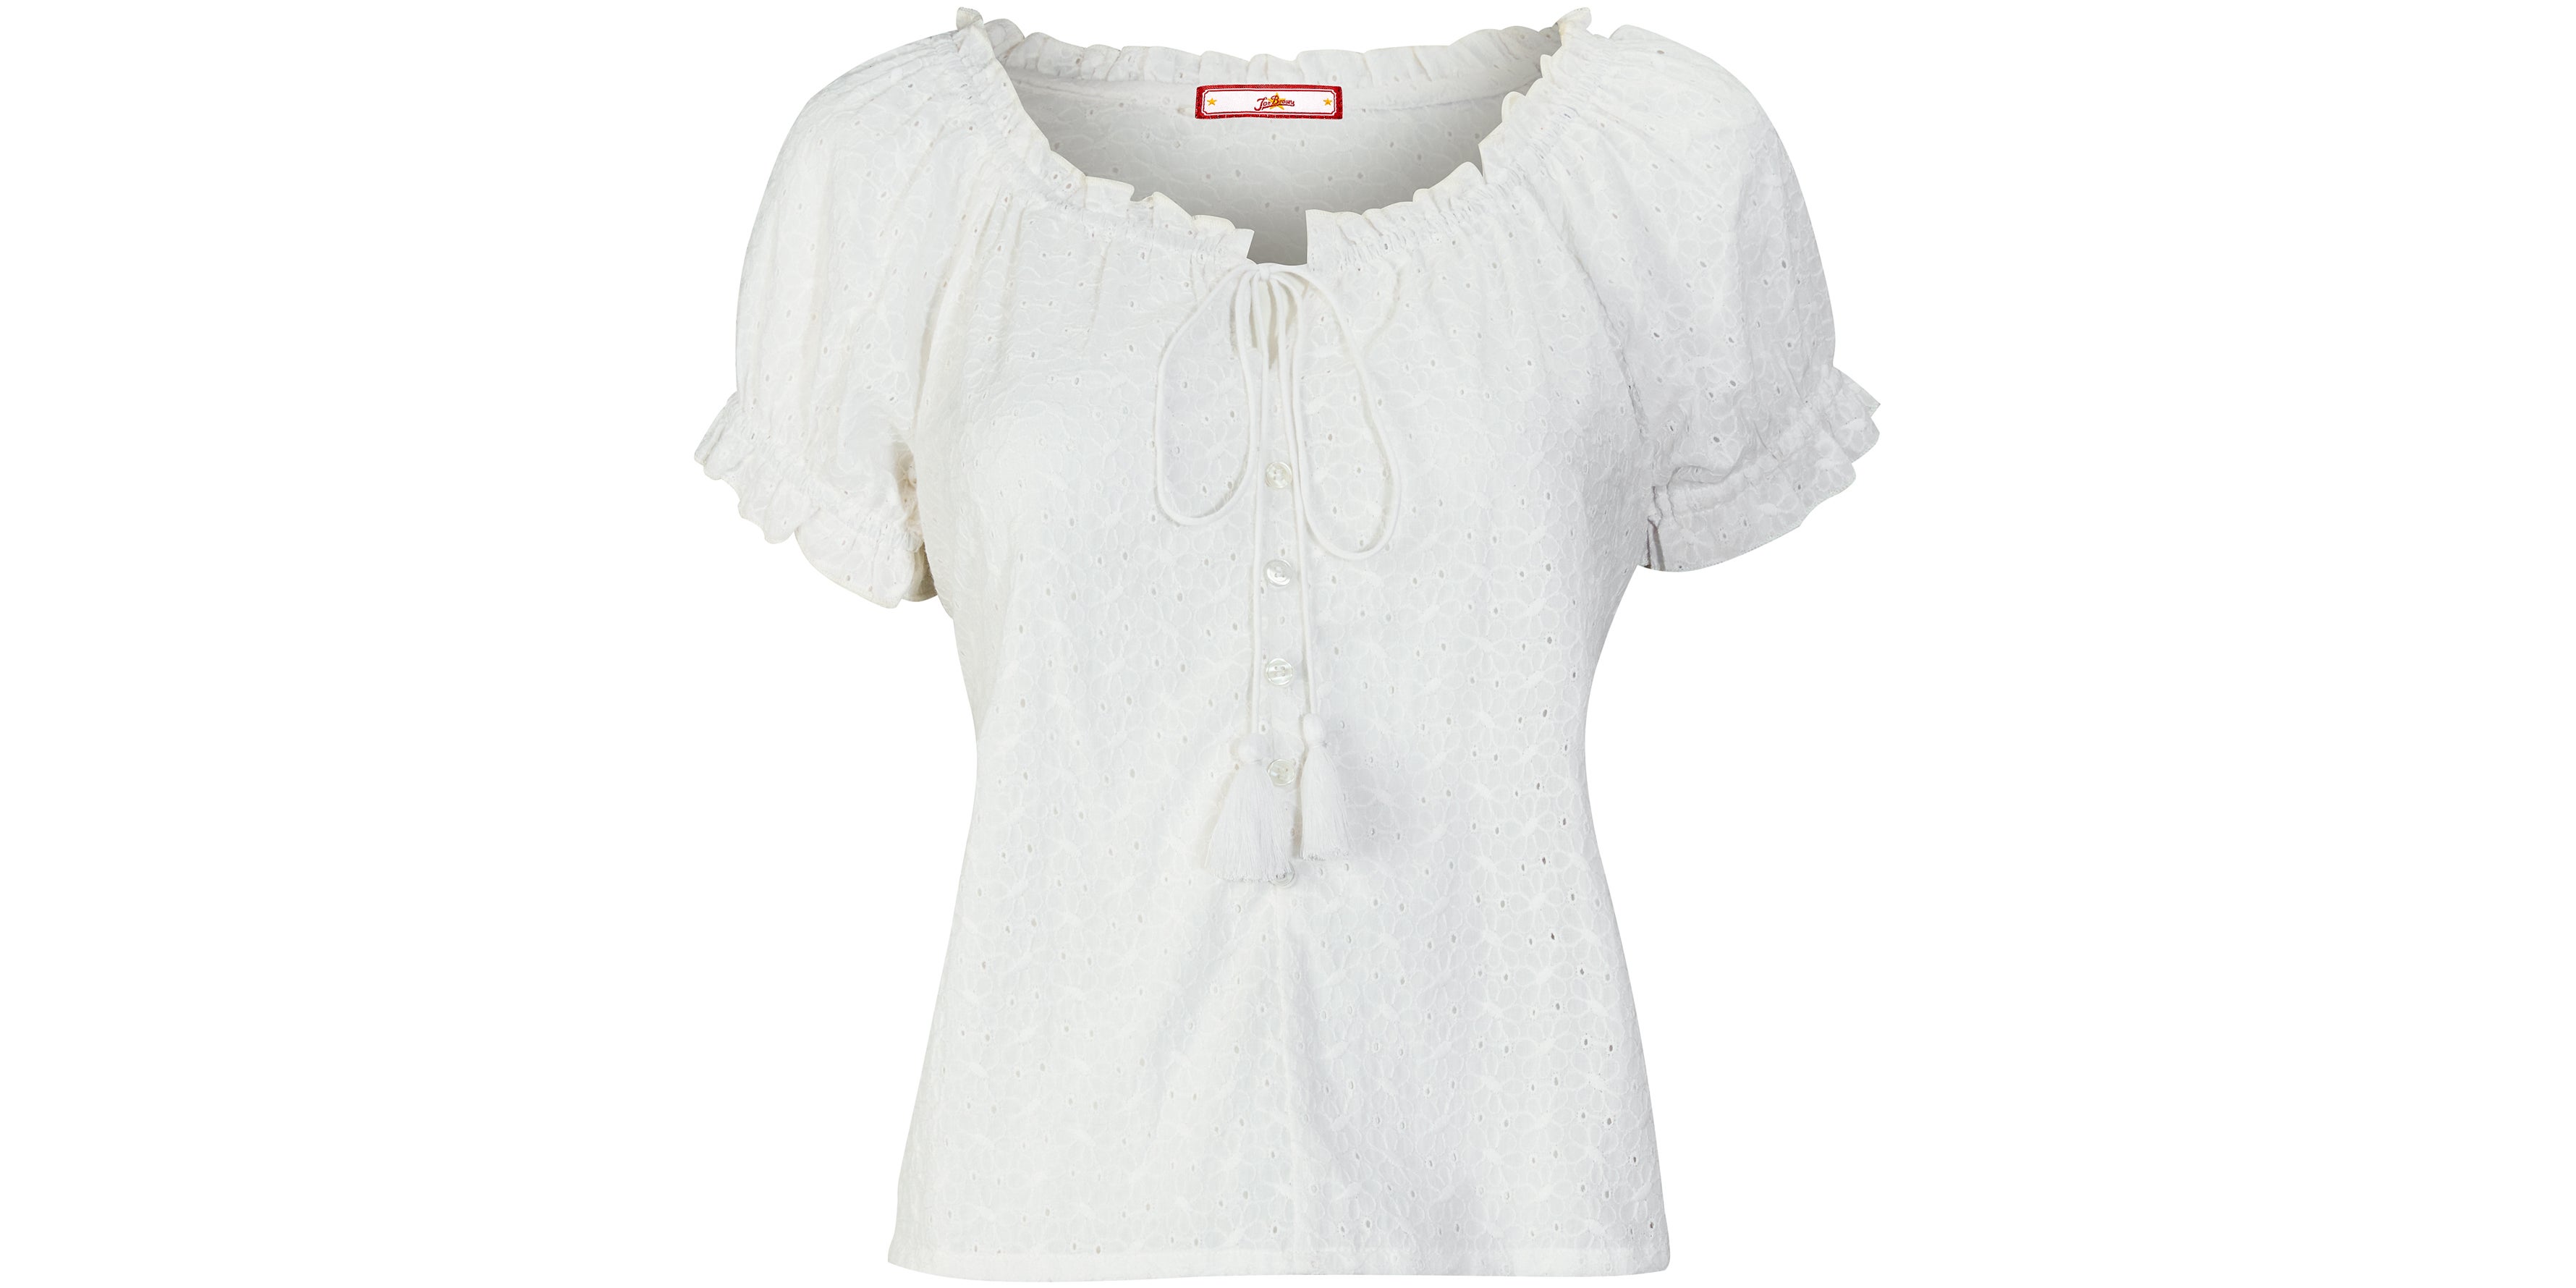 Joe Browns Broderie Anglaise Top in White, ?35